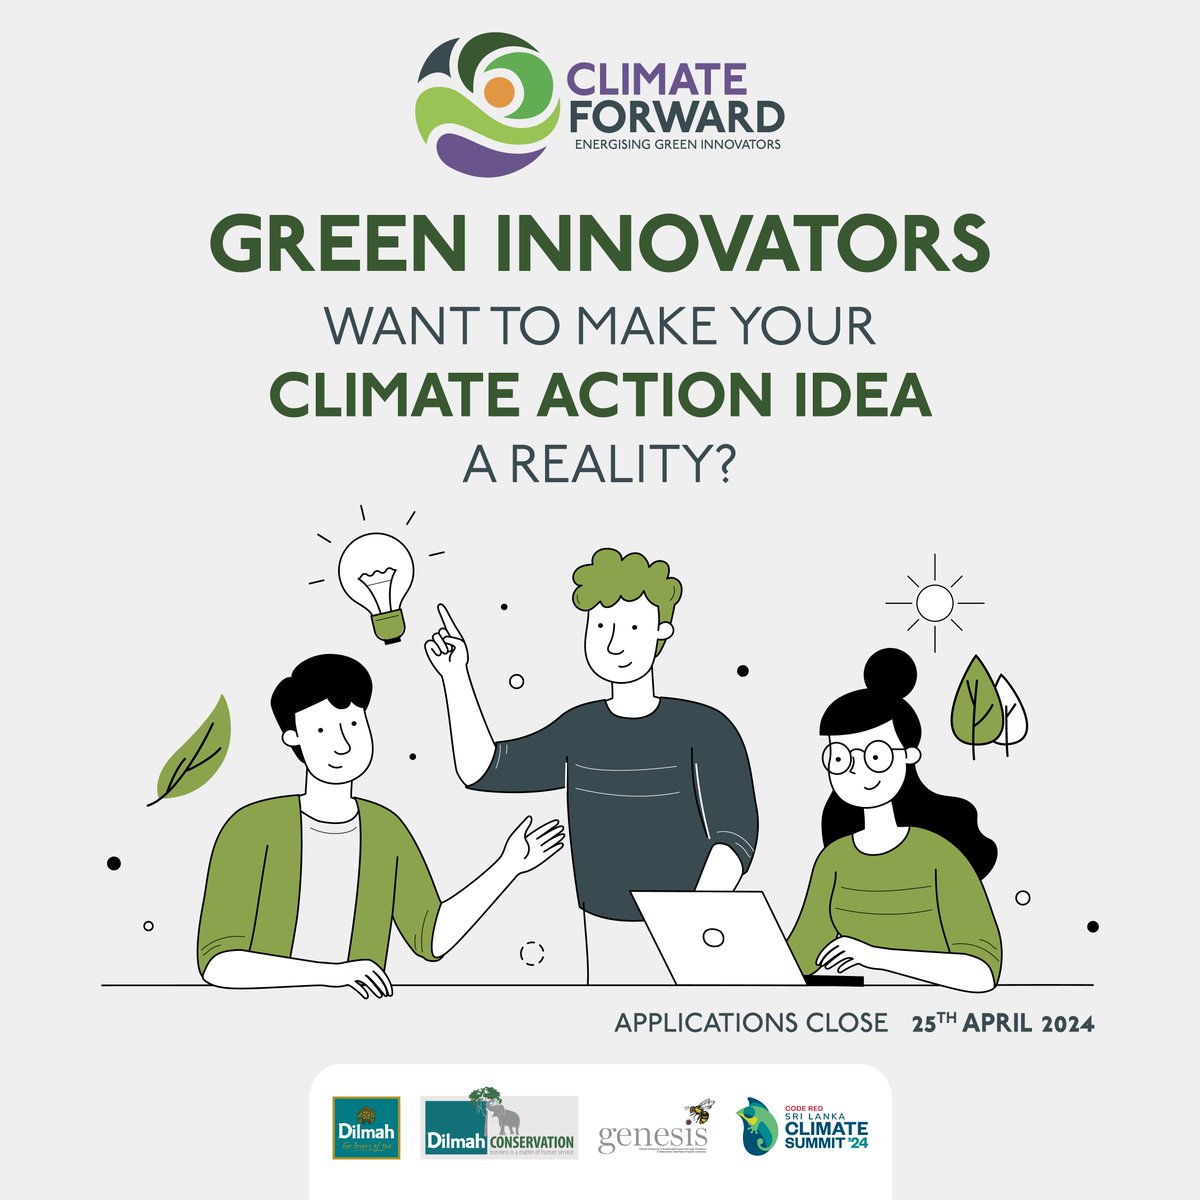 Green growth demands innovation & fresh perspective. This is a call for submission from young innovators with ideas for climate action. 25 ecopreneurs have submitted ideas to our Climate Forward Green Innovation platform. Deadline extended to 13th May. buff.ly/3WcRrWg